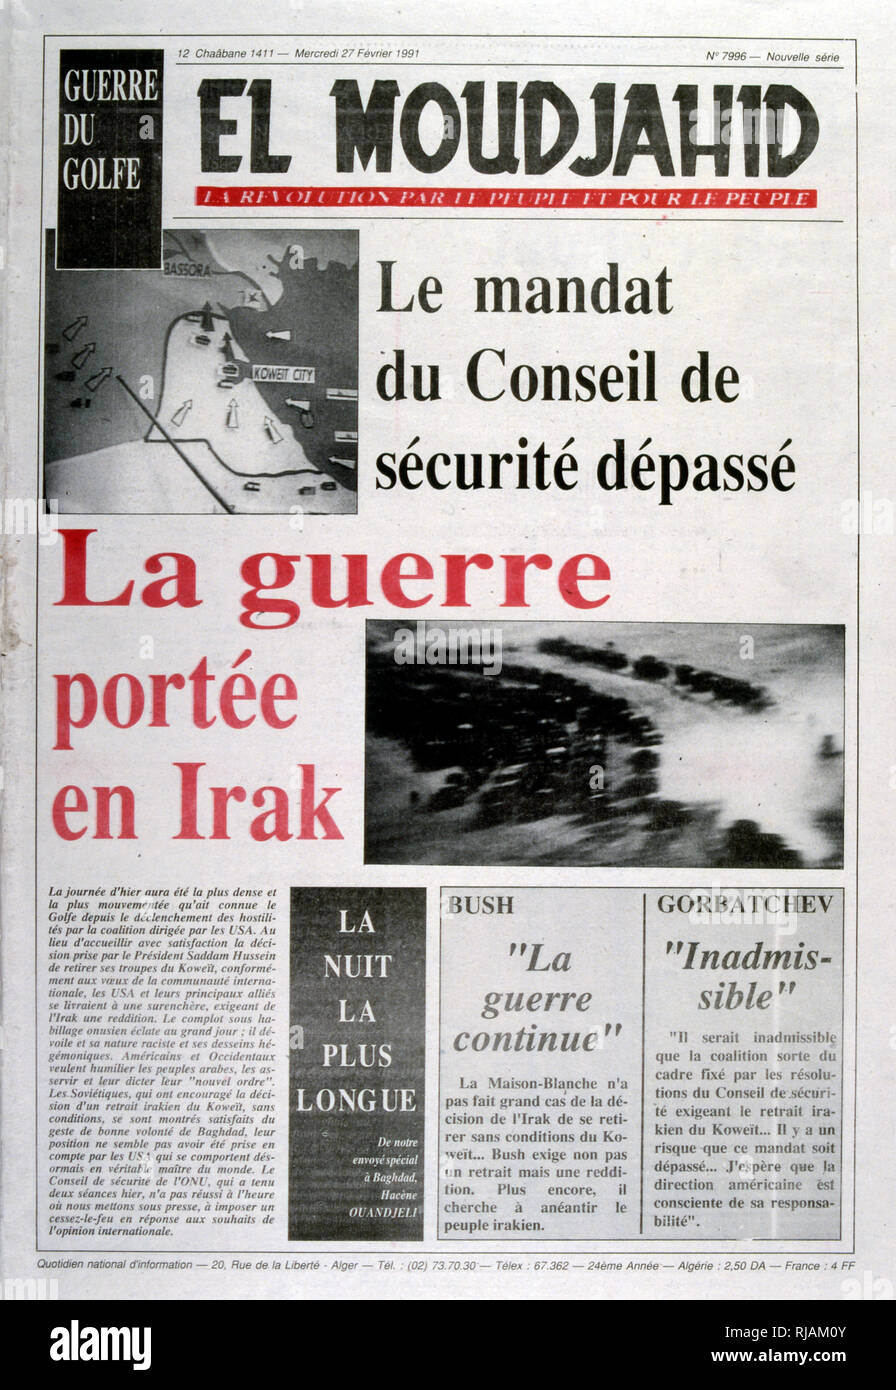 Headline in 'El Moudjahid' an official Algerian publication, 27th February 1991, concerning the retreat of Iraqi forces from Kuwait. The Gulf War (2 August 1990 - 28 February 1991), codenamed Operation Desert Shield and Operation Desert Storm, was a war waged by coalition forces from 35 nations led by the United States against Iraq in response to Iraq's invasion and annexation of Kuwait. Stock Photo